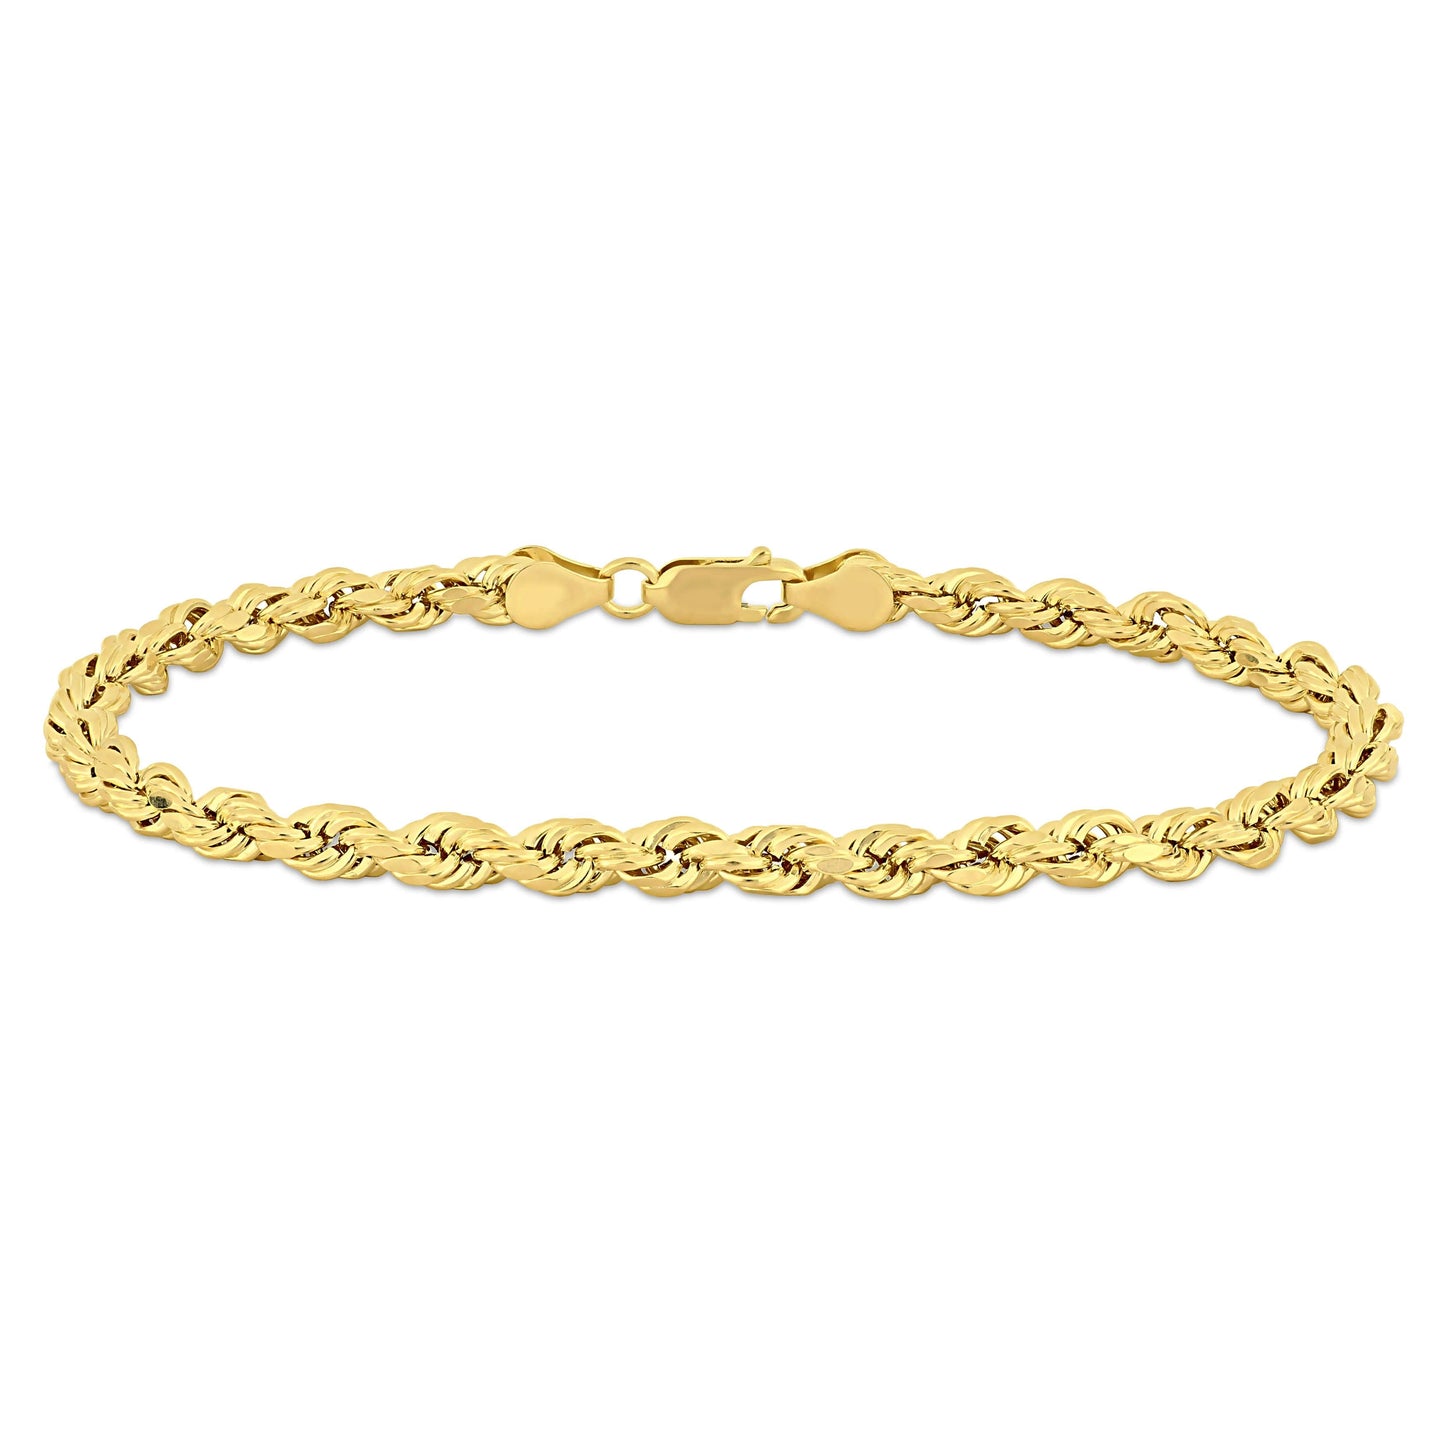 10k Yellow Gold Rope Chain Bracelet in 5mm